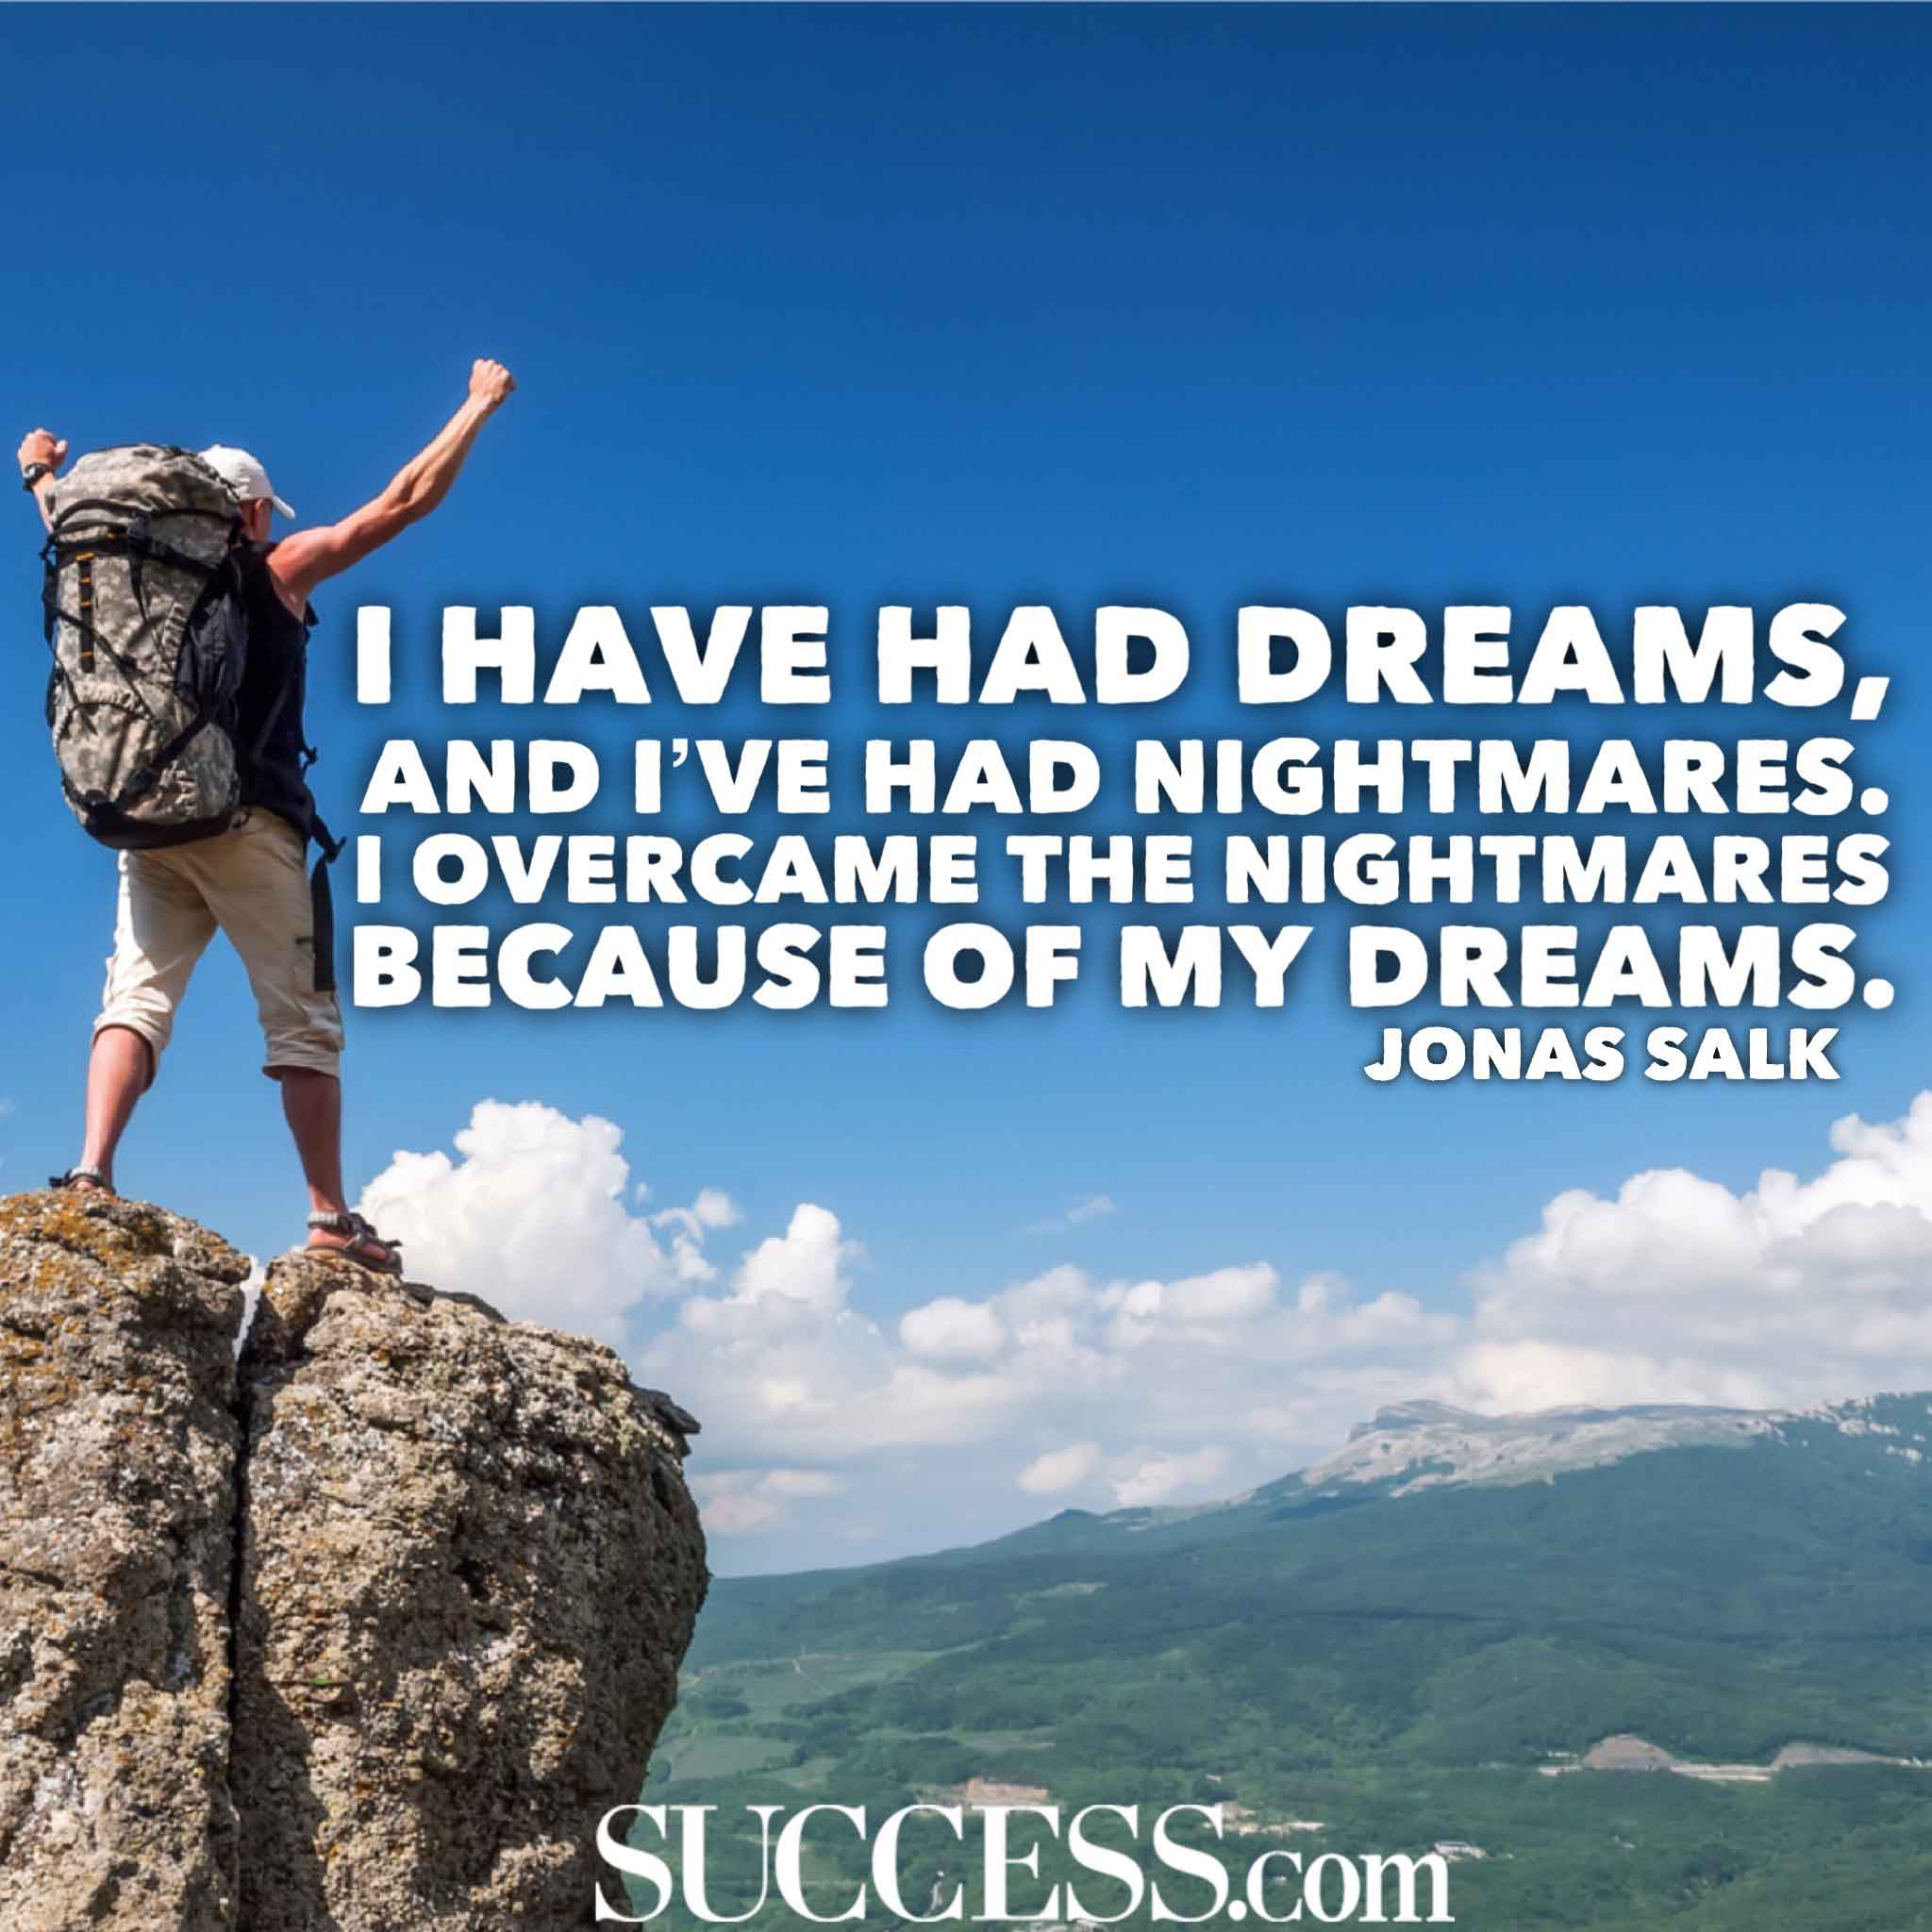 15 Inspiring Quotes About Being a Dreamer